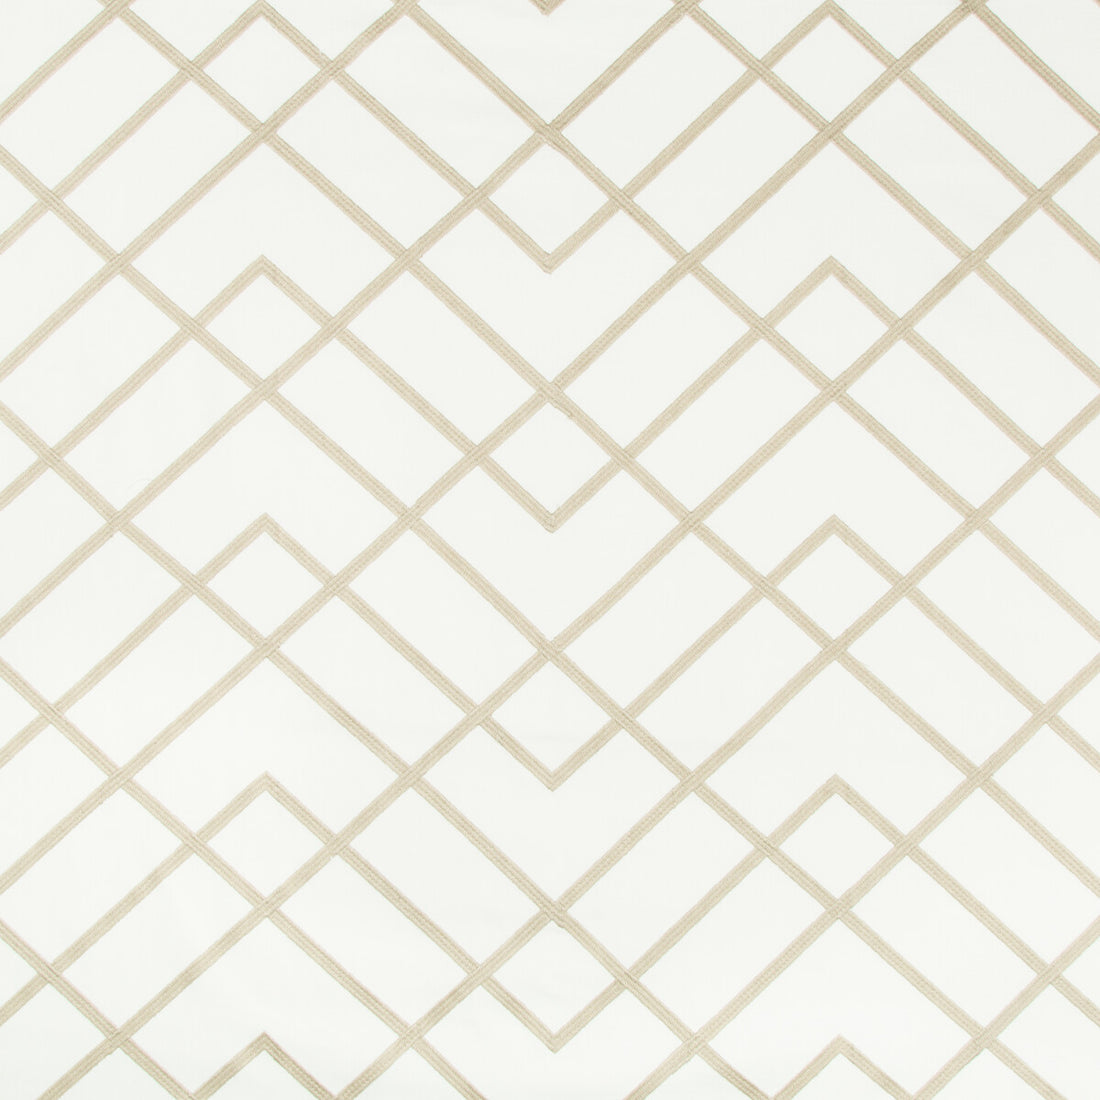 Tapeley fabric in linen color - pattern 35299.11.0 - by Kravet Basics in the Greenwich collection